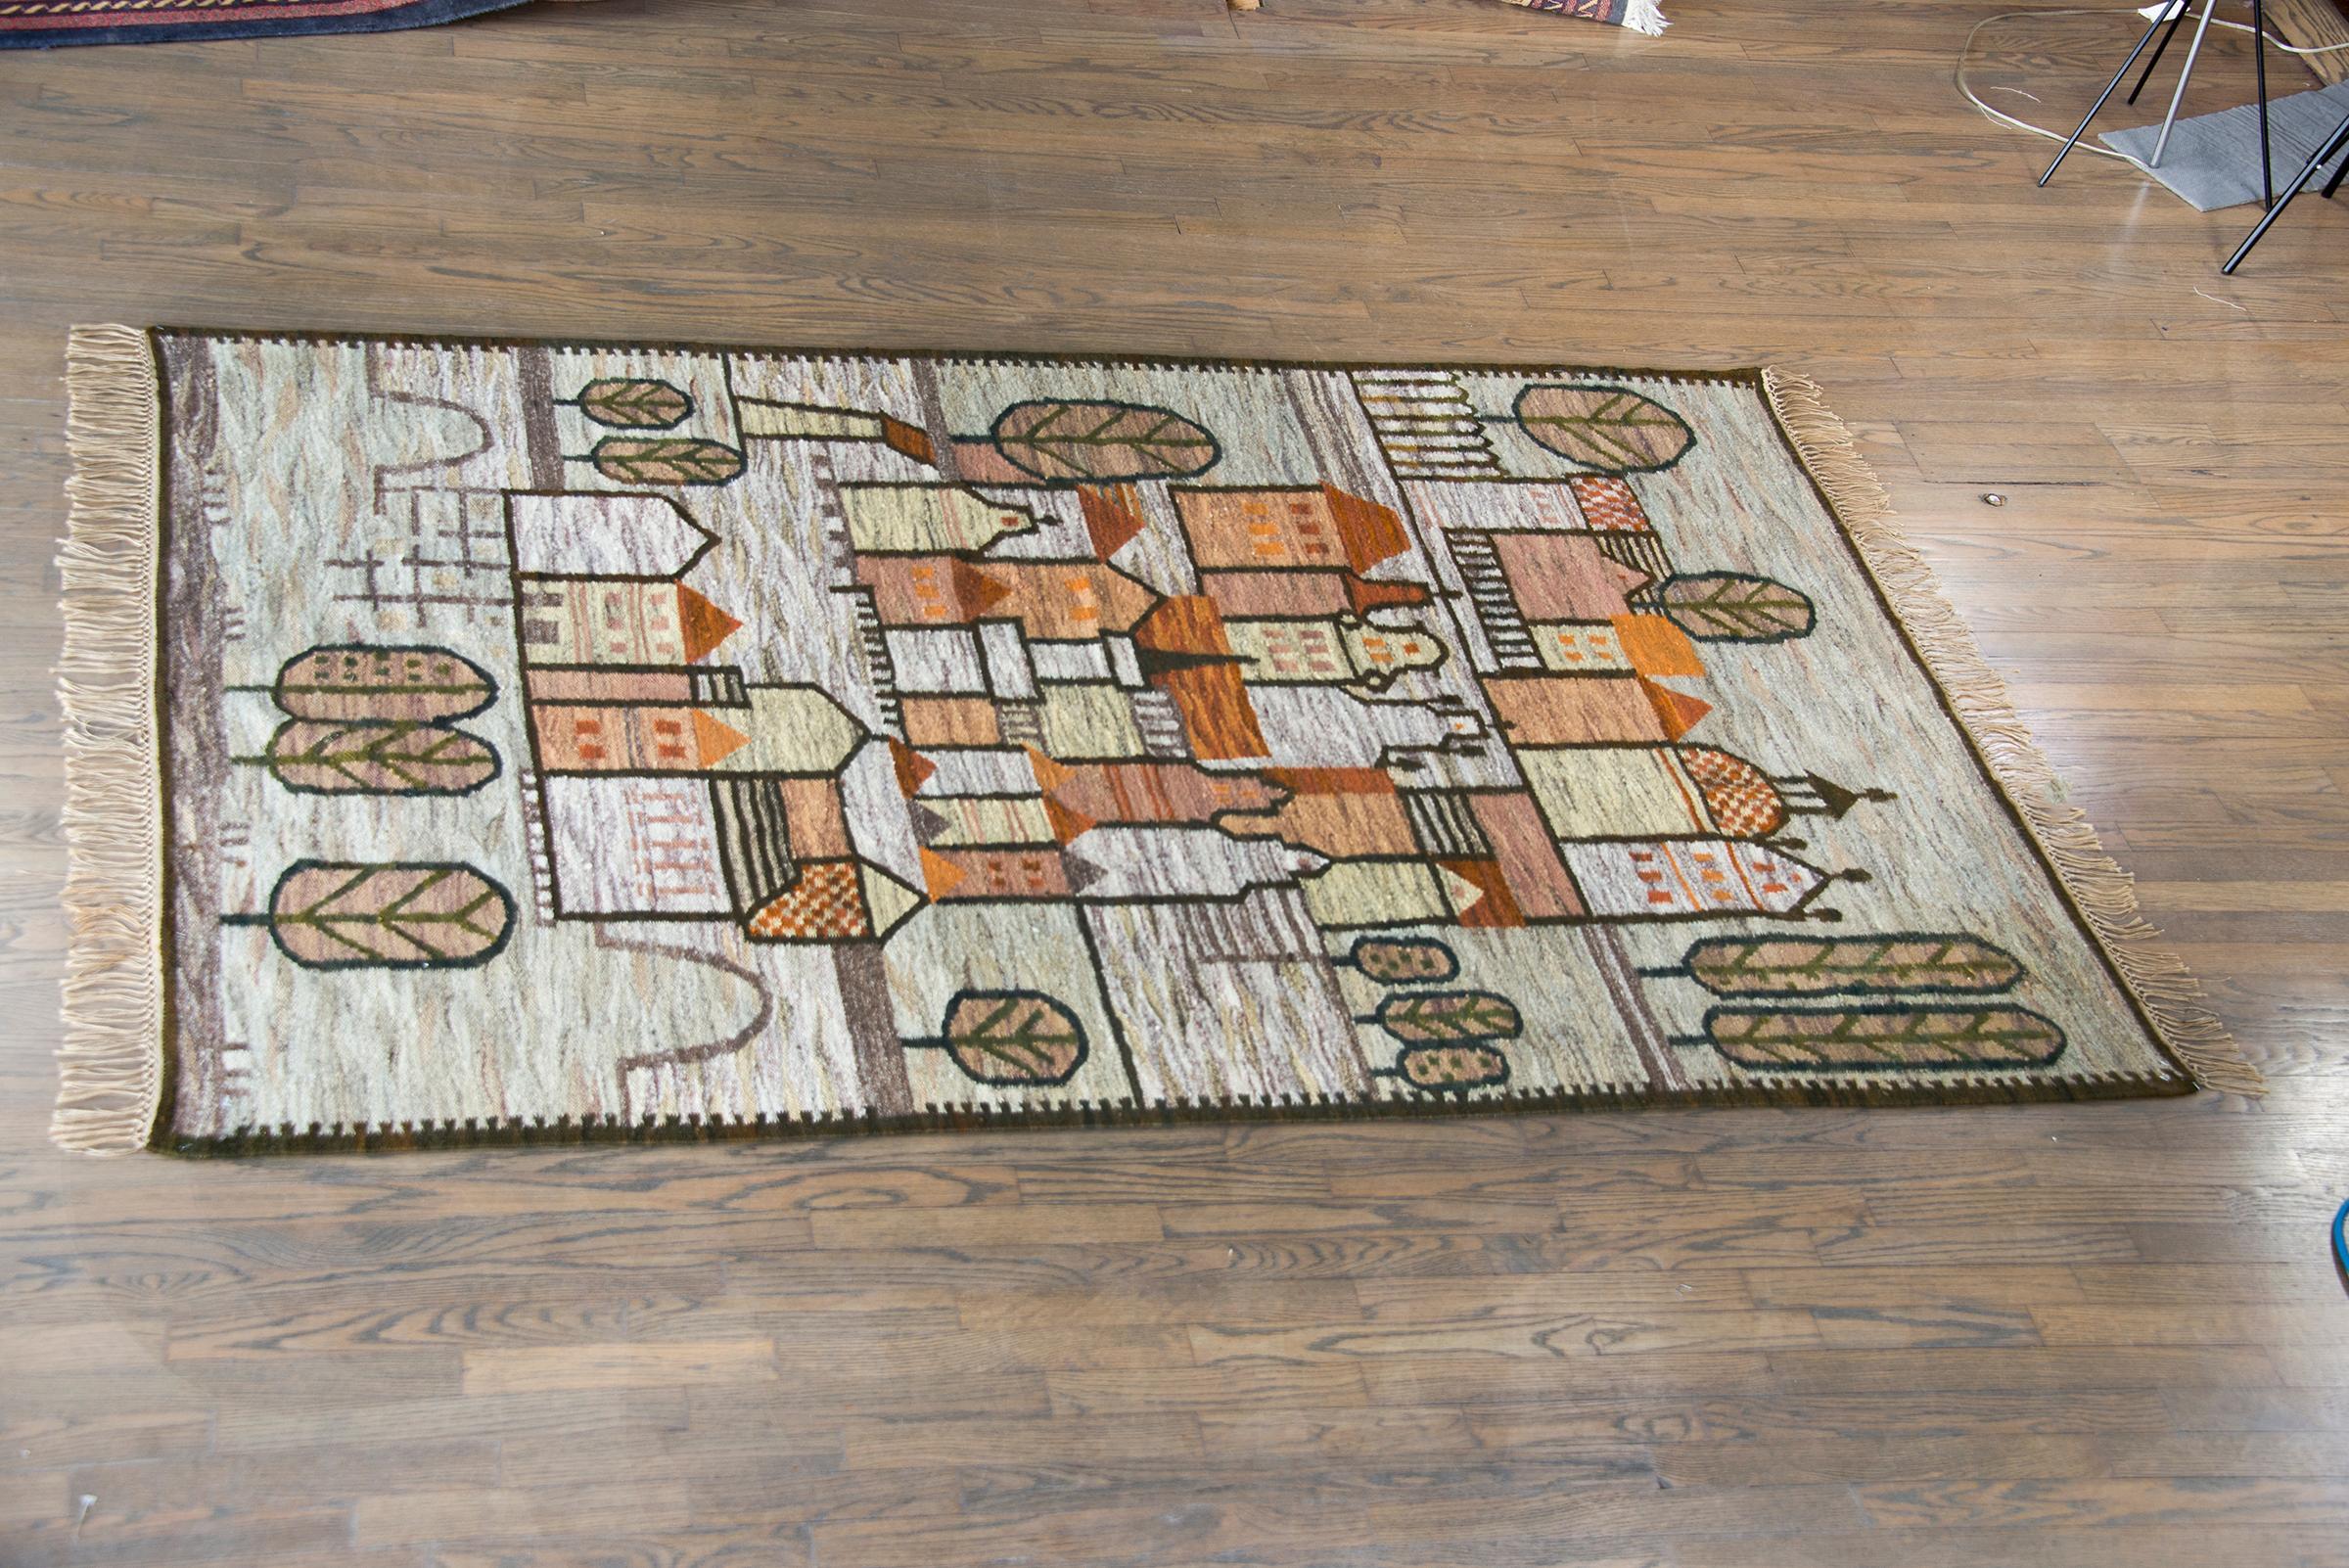 A beautiful mid-20th century Polish Folk Art Cepelia rug depicting a village with rows of houses and churches, and sylized trees, all woven in muted orange, yellows, creams, greens, and browns.  Cepelia rugs were a luxury commodity made during the